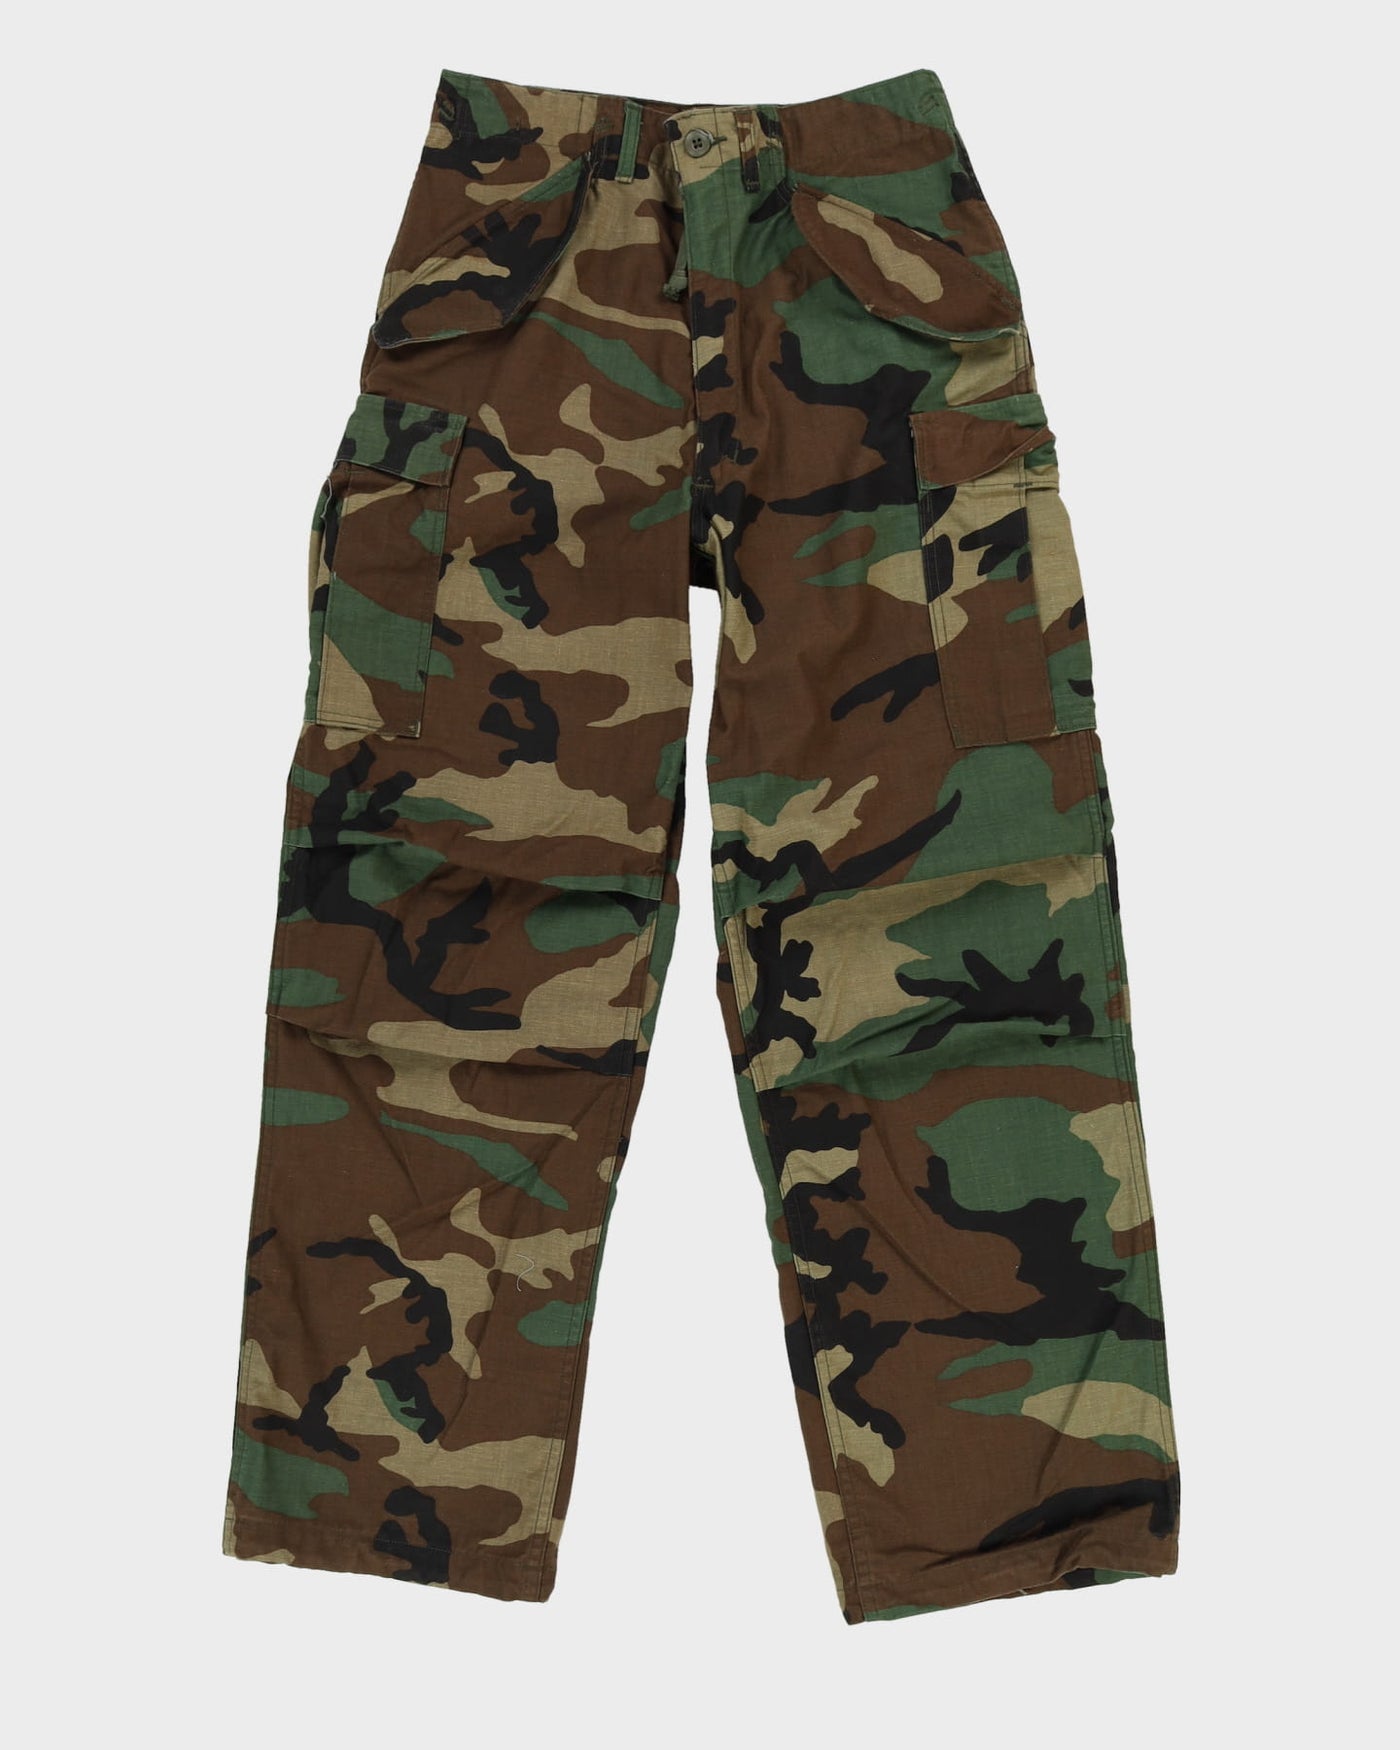 90s Vintage US Military Cold Weather Woodland Camo Trousers - 30x32